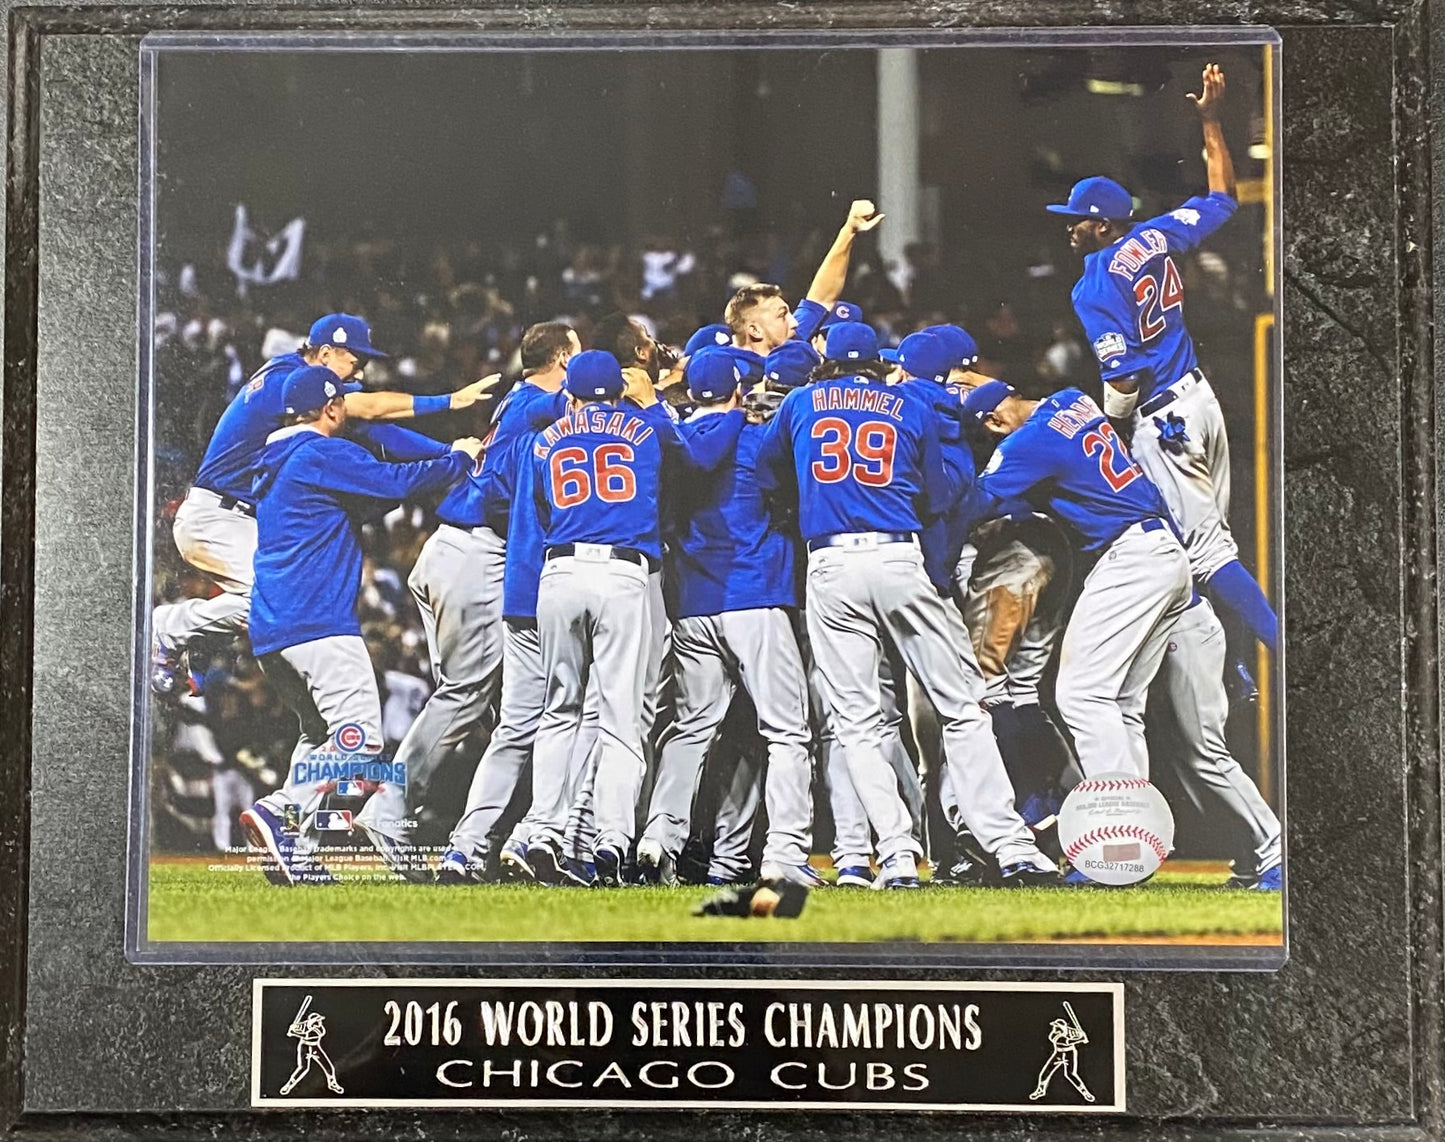 Chicago Cubs 2016 World Series Champions Wall Plaque